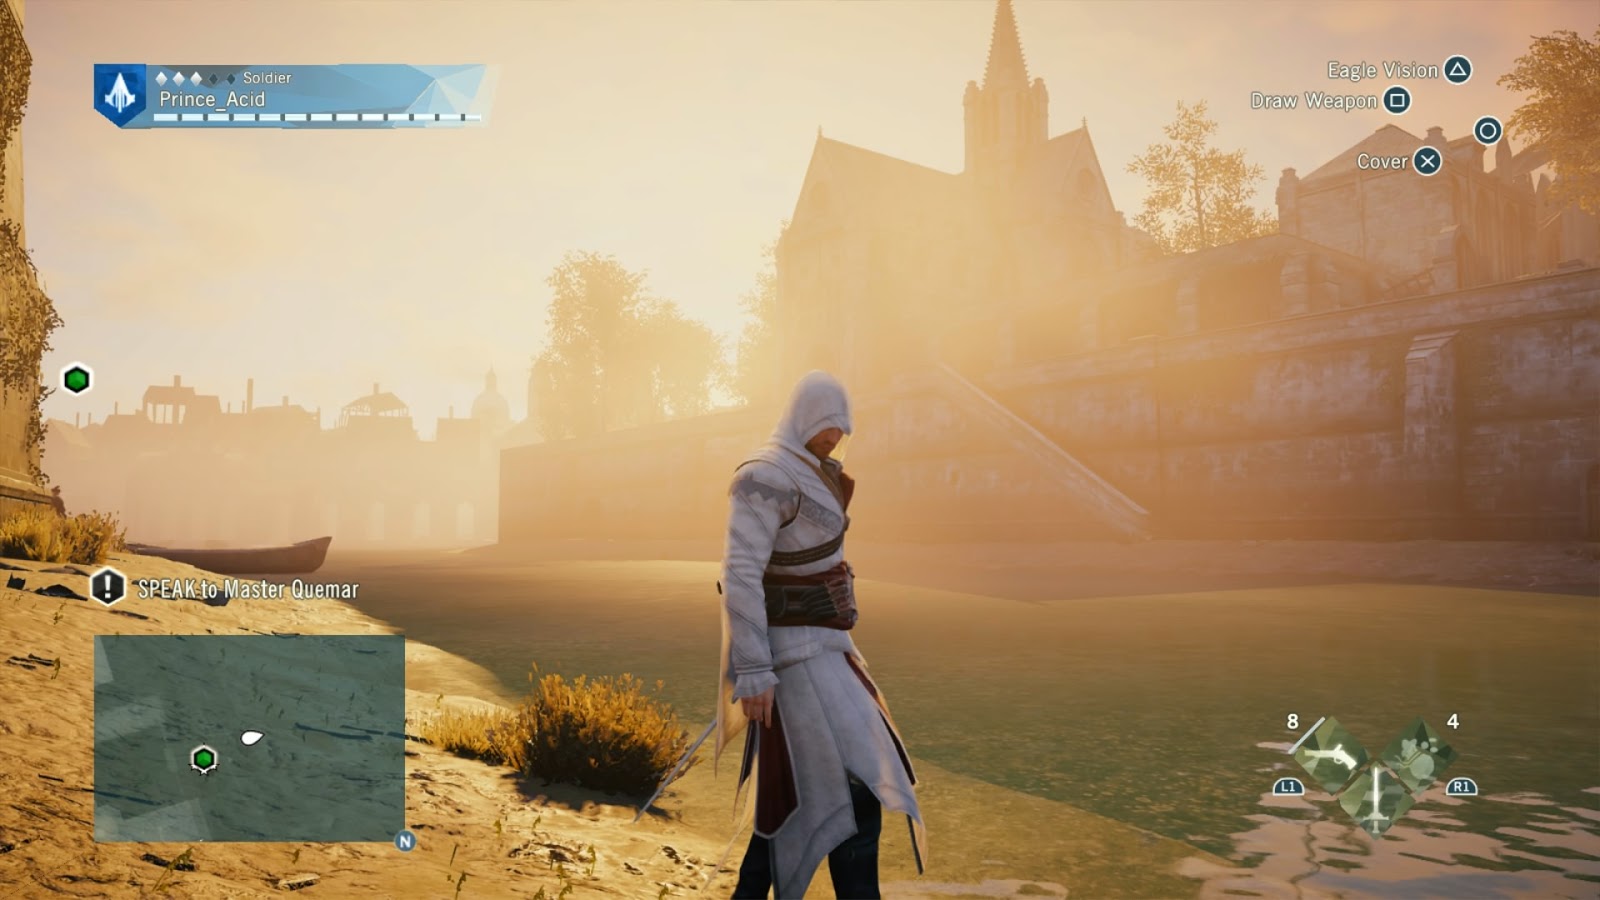 Assassin's Creed: Unity First Impressions and Gameplay Video - The Koalition